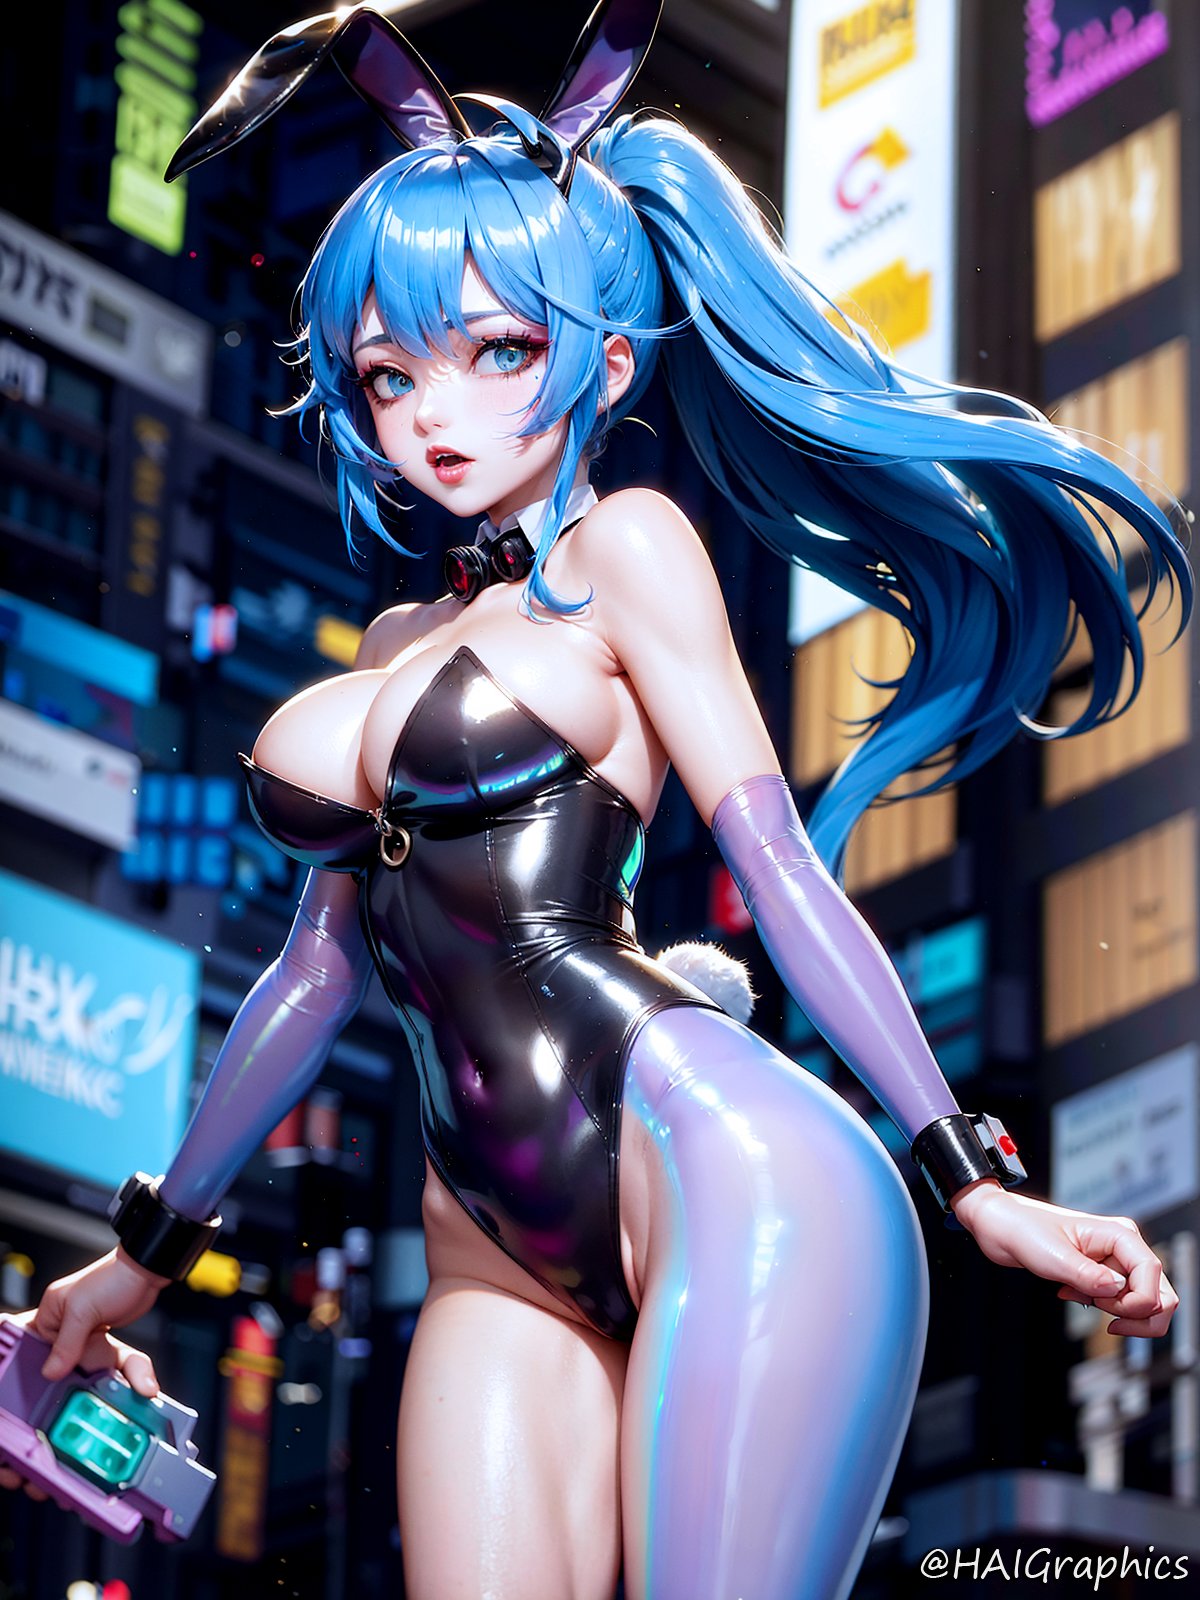 General 1200x1600 AI art Stable Diffusion women Asian portrait display thighs bunny suit bunny ears bunny tail big boobs long hair lights cyan hair aqua eyes looking at viewer city city lights black leotard latex cleavage